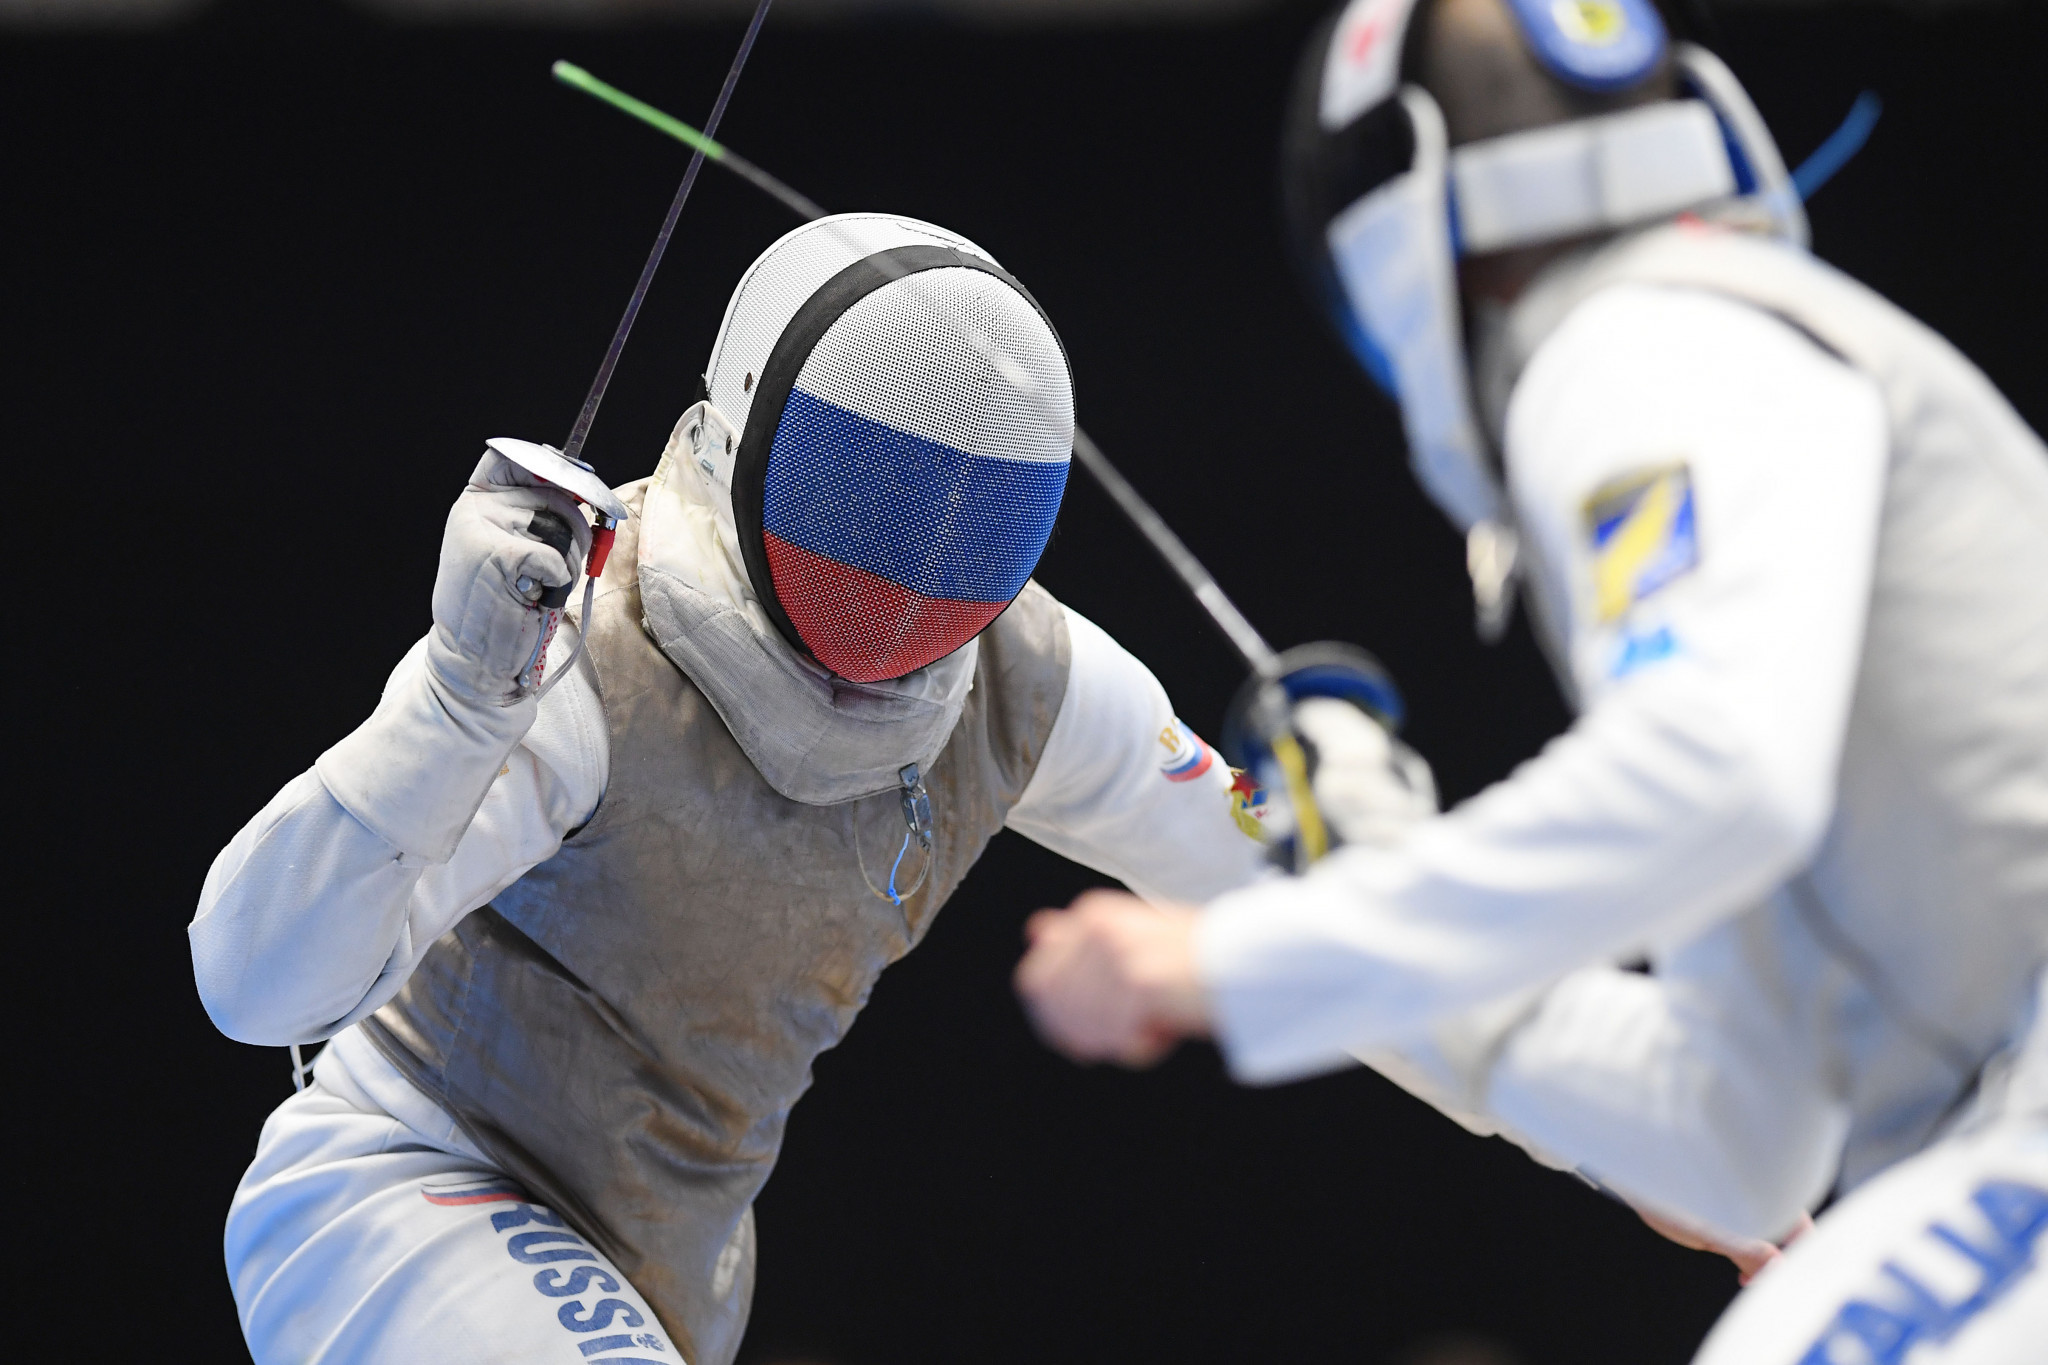 FIE approves return of Russian and Belarusian fencers in time for start of Paris 2024 qualifying